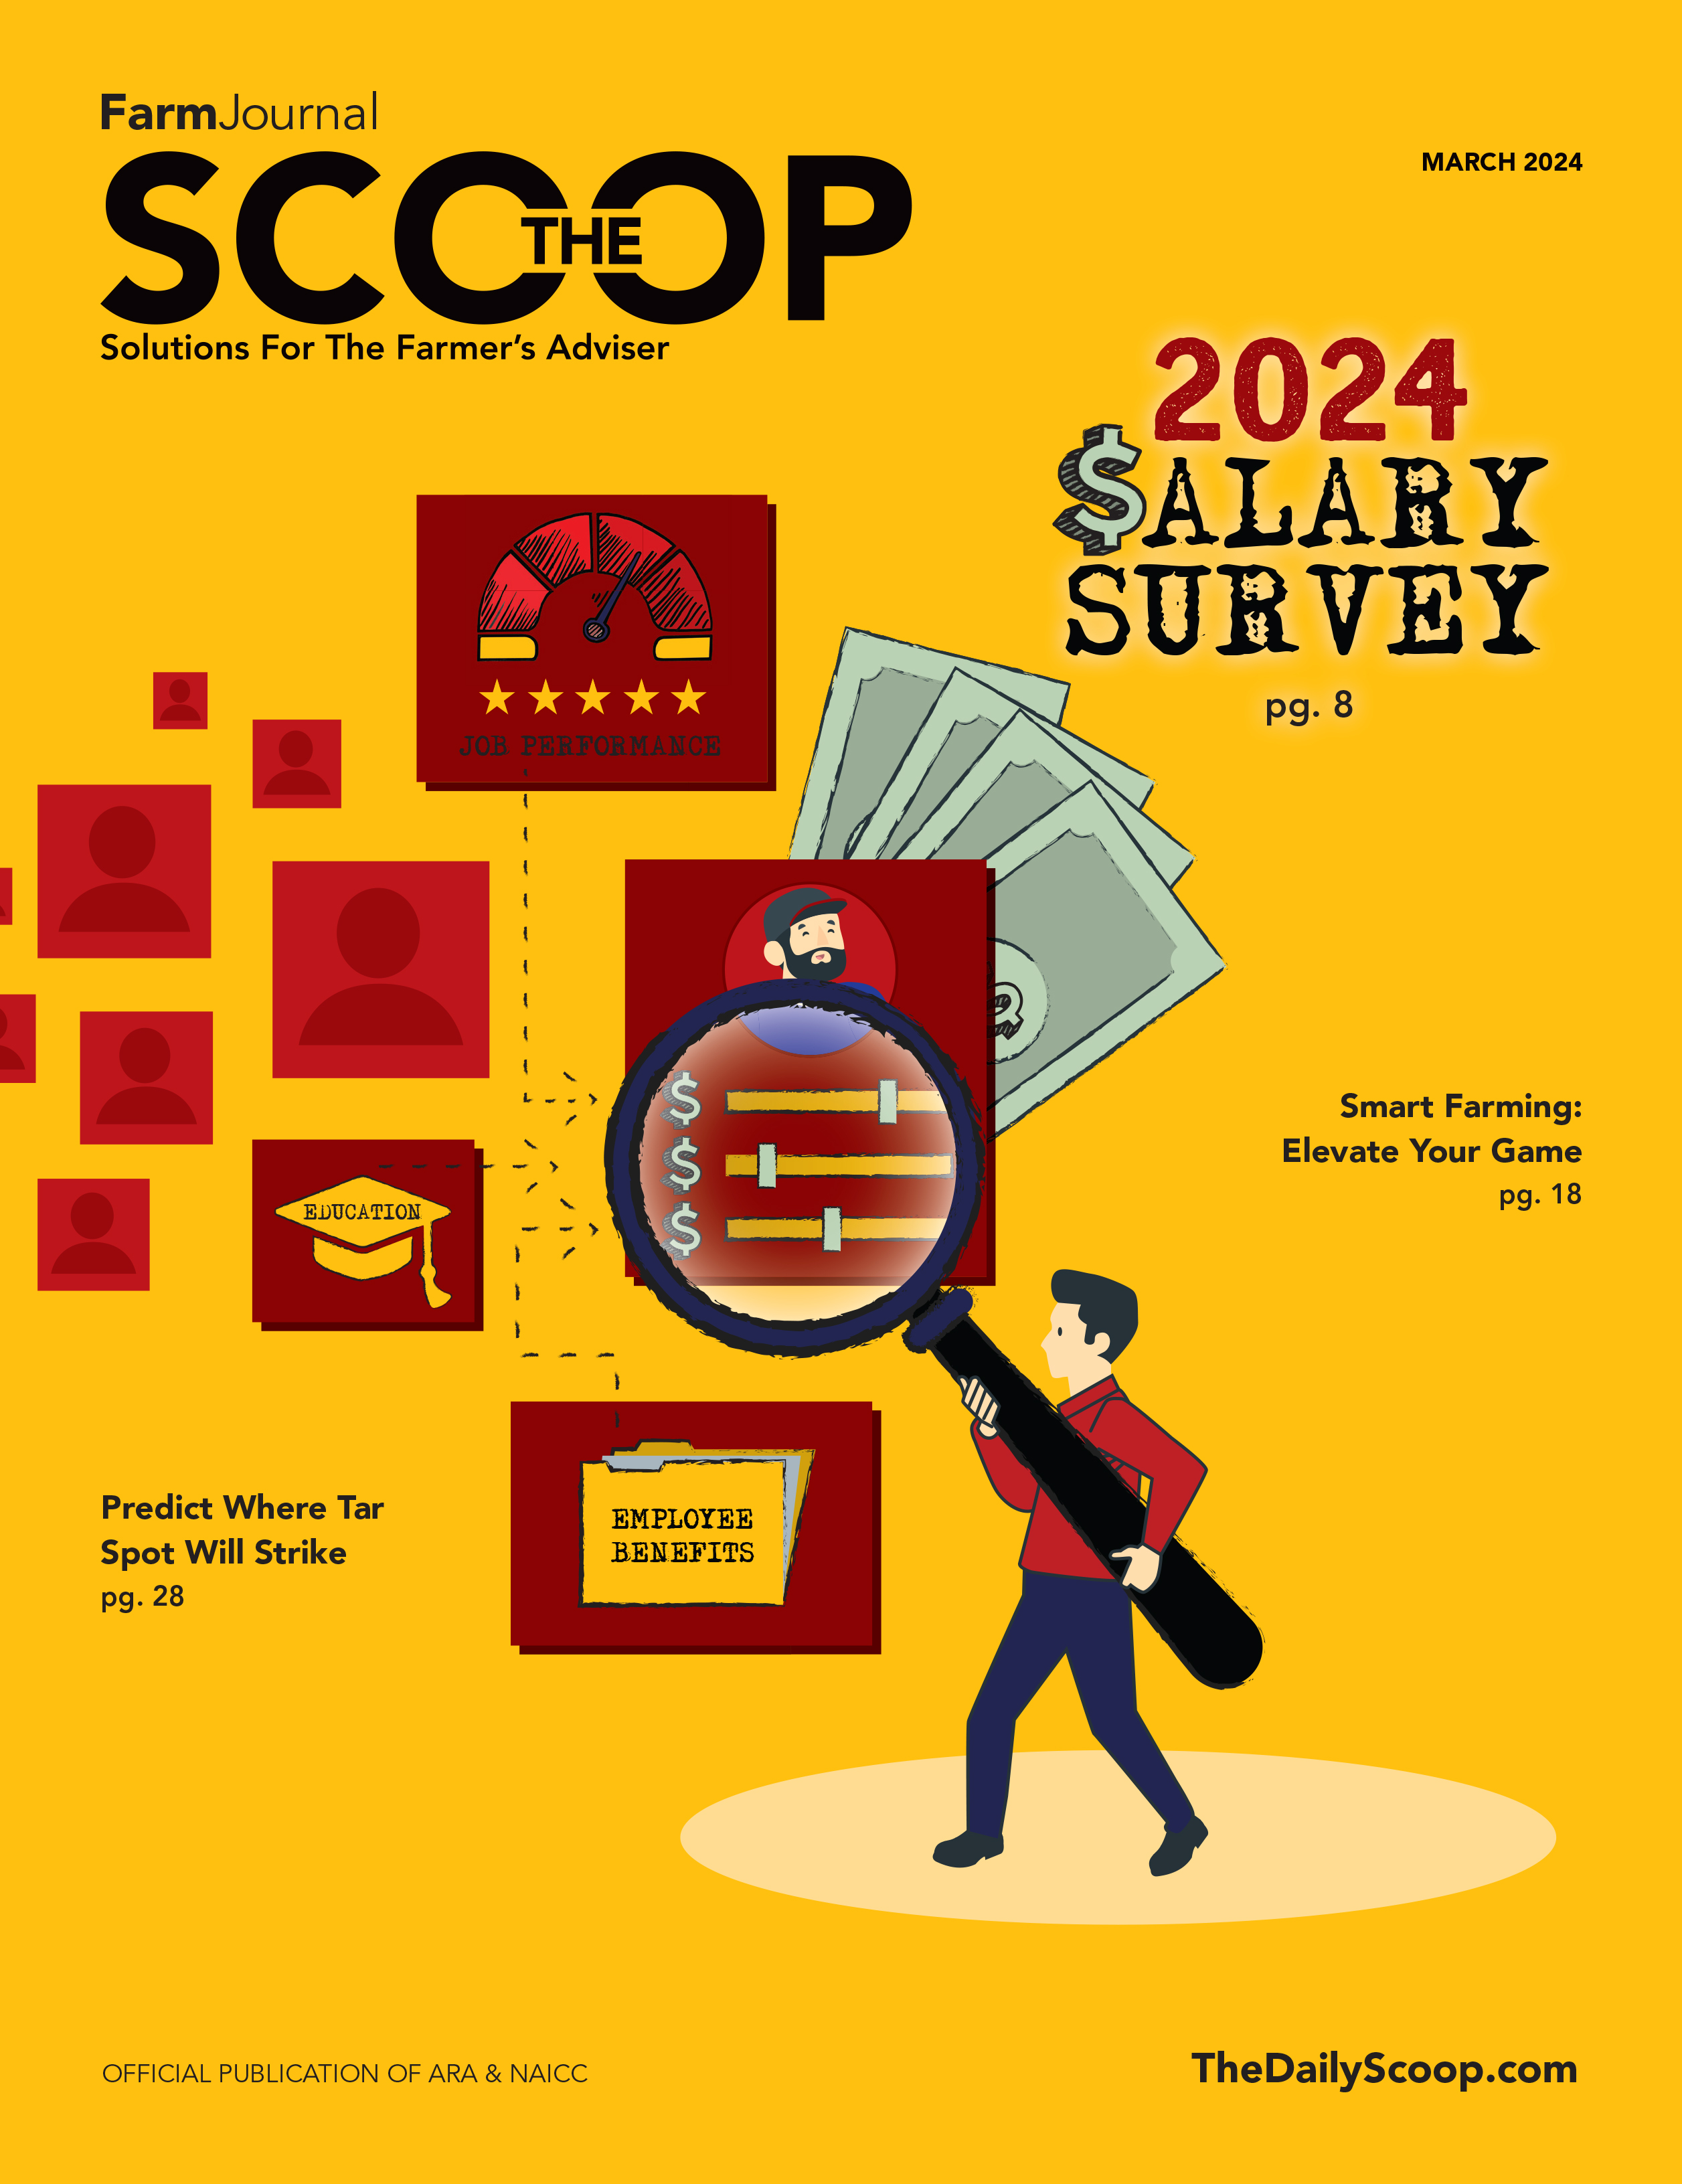  The Scoop - March 2024 